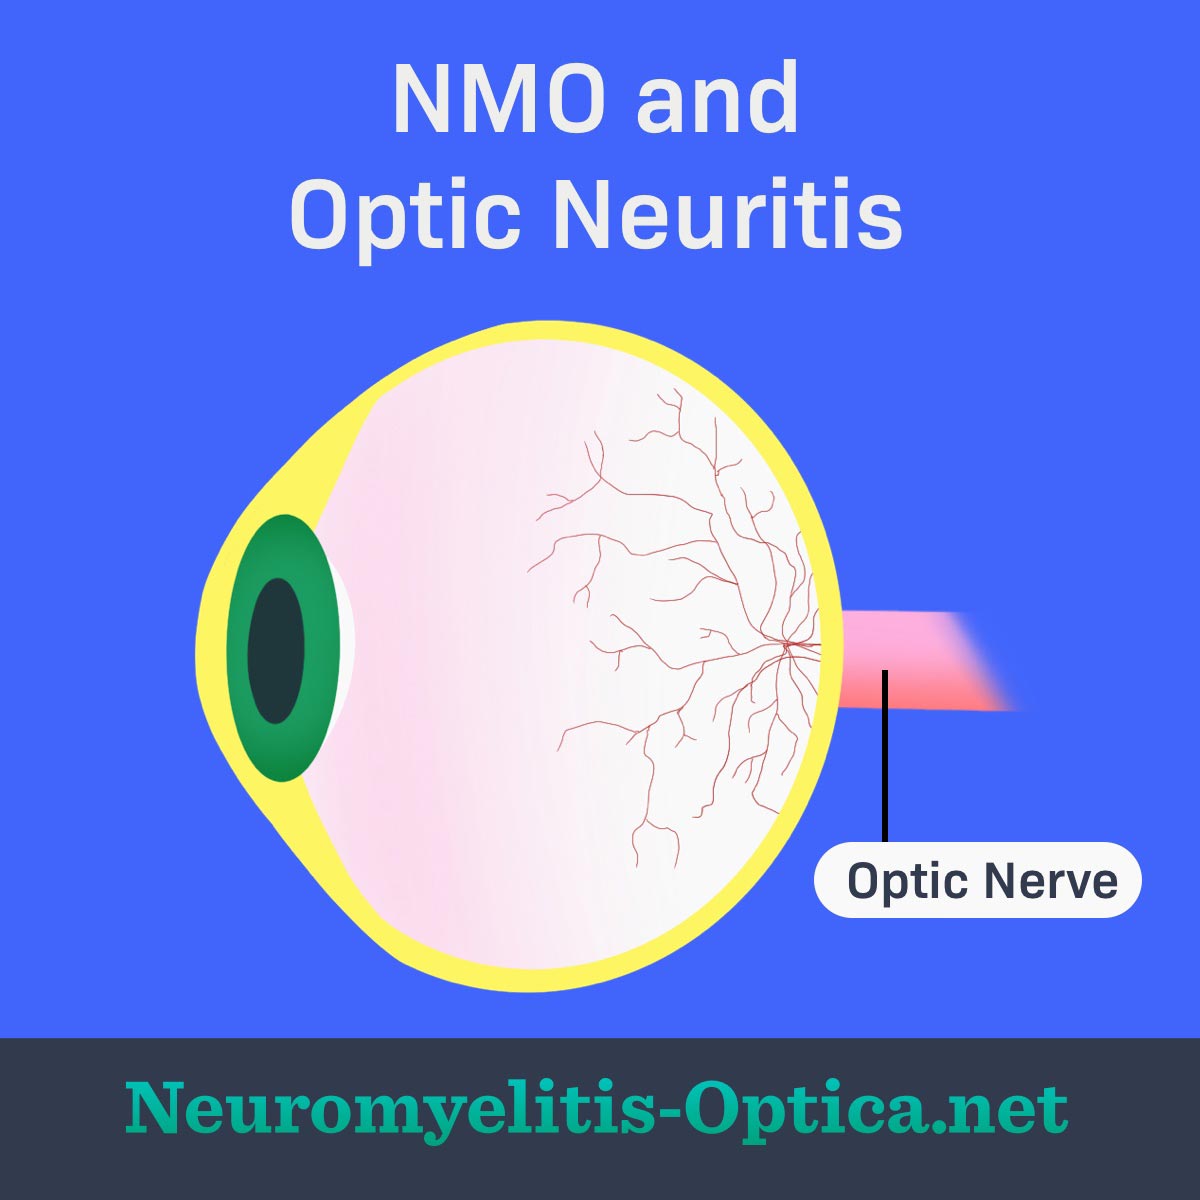 Image of eyeball highlighting the optic nerve which is affected by NMO.